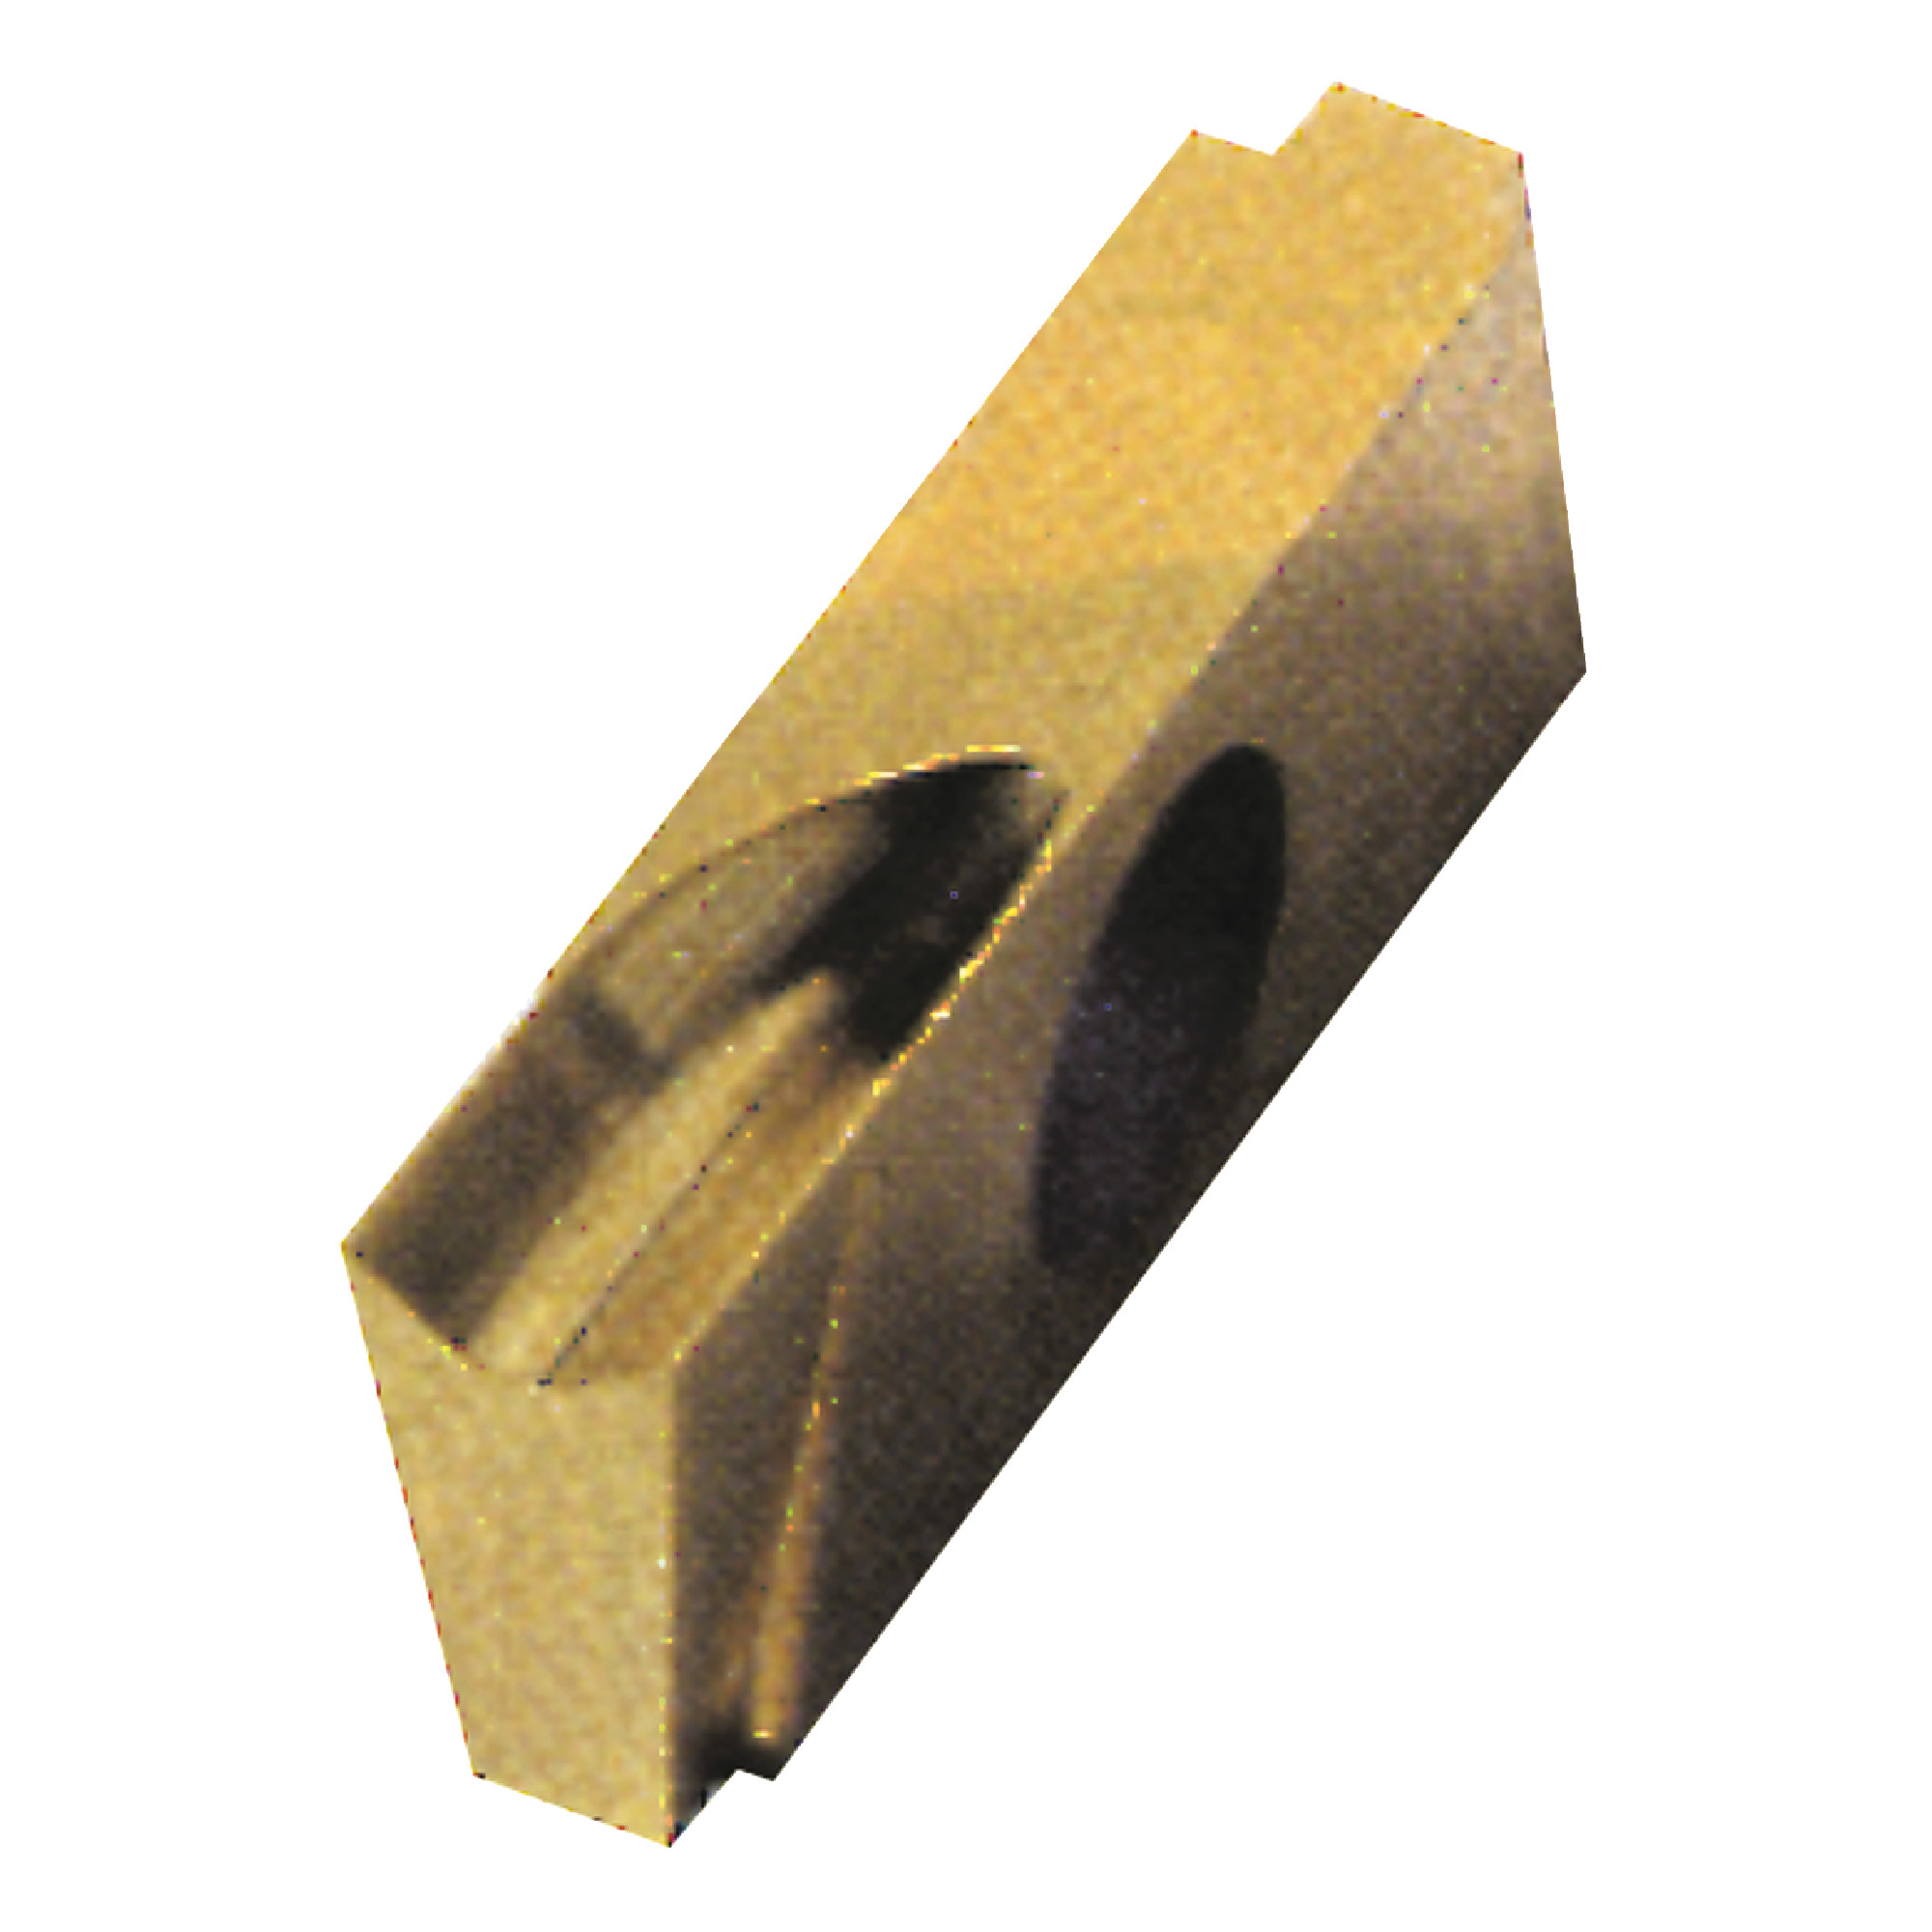 NIKCOLE - GIE-7-ST-3R C5-PV / Indexable Carbide Insert for Turning / 0.125" Cutting Width / Right Hand